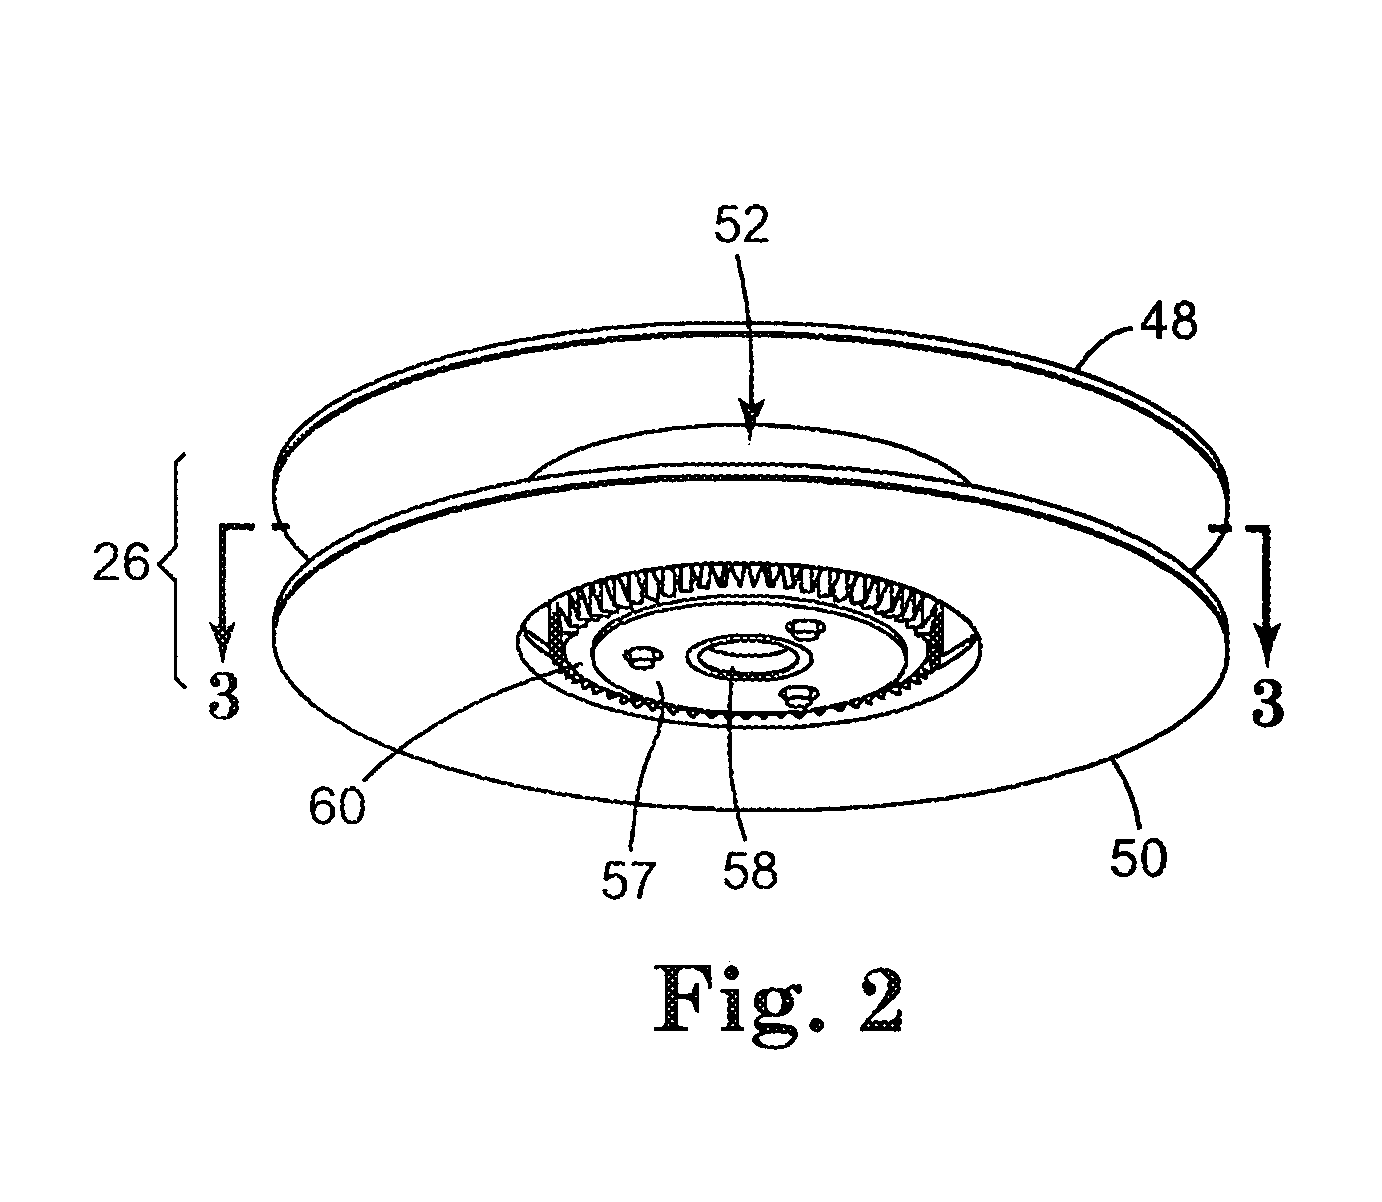 Tape reel assembly with stiff winding surface for a tape drive system